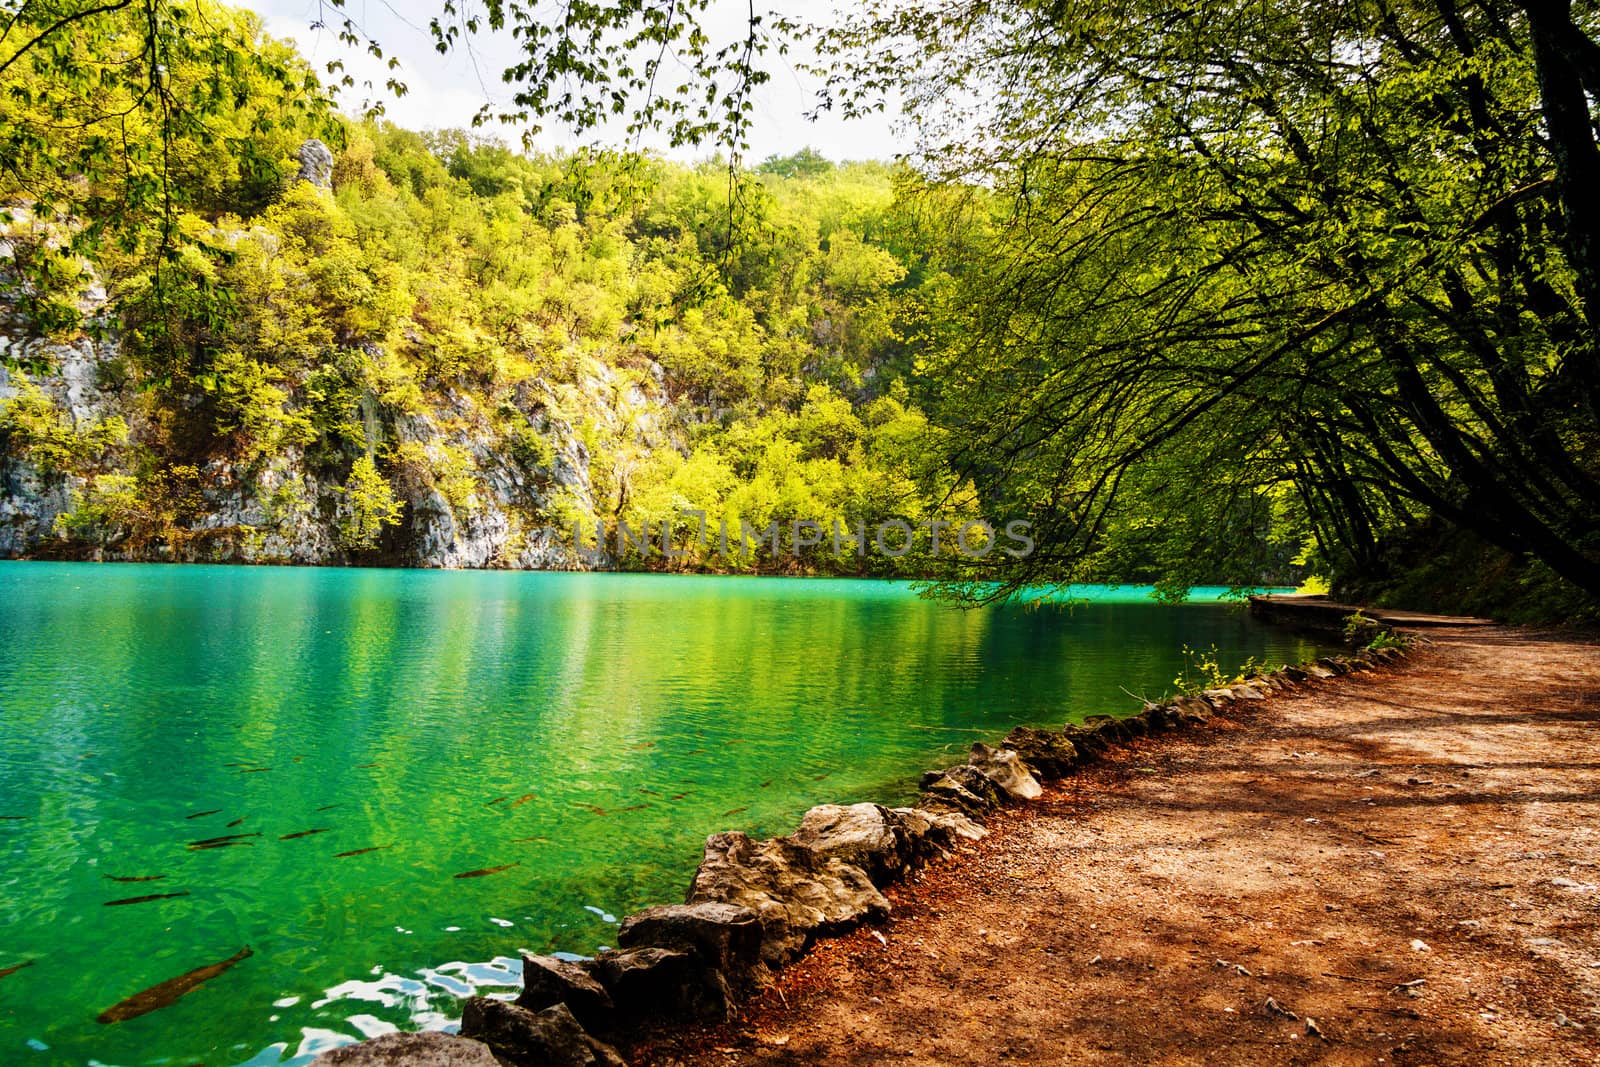 Beaten track near a forest lake in Plitvice Lakes National Park, by Lamarinx